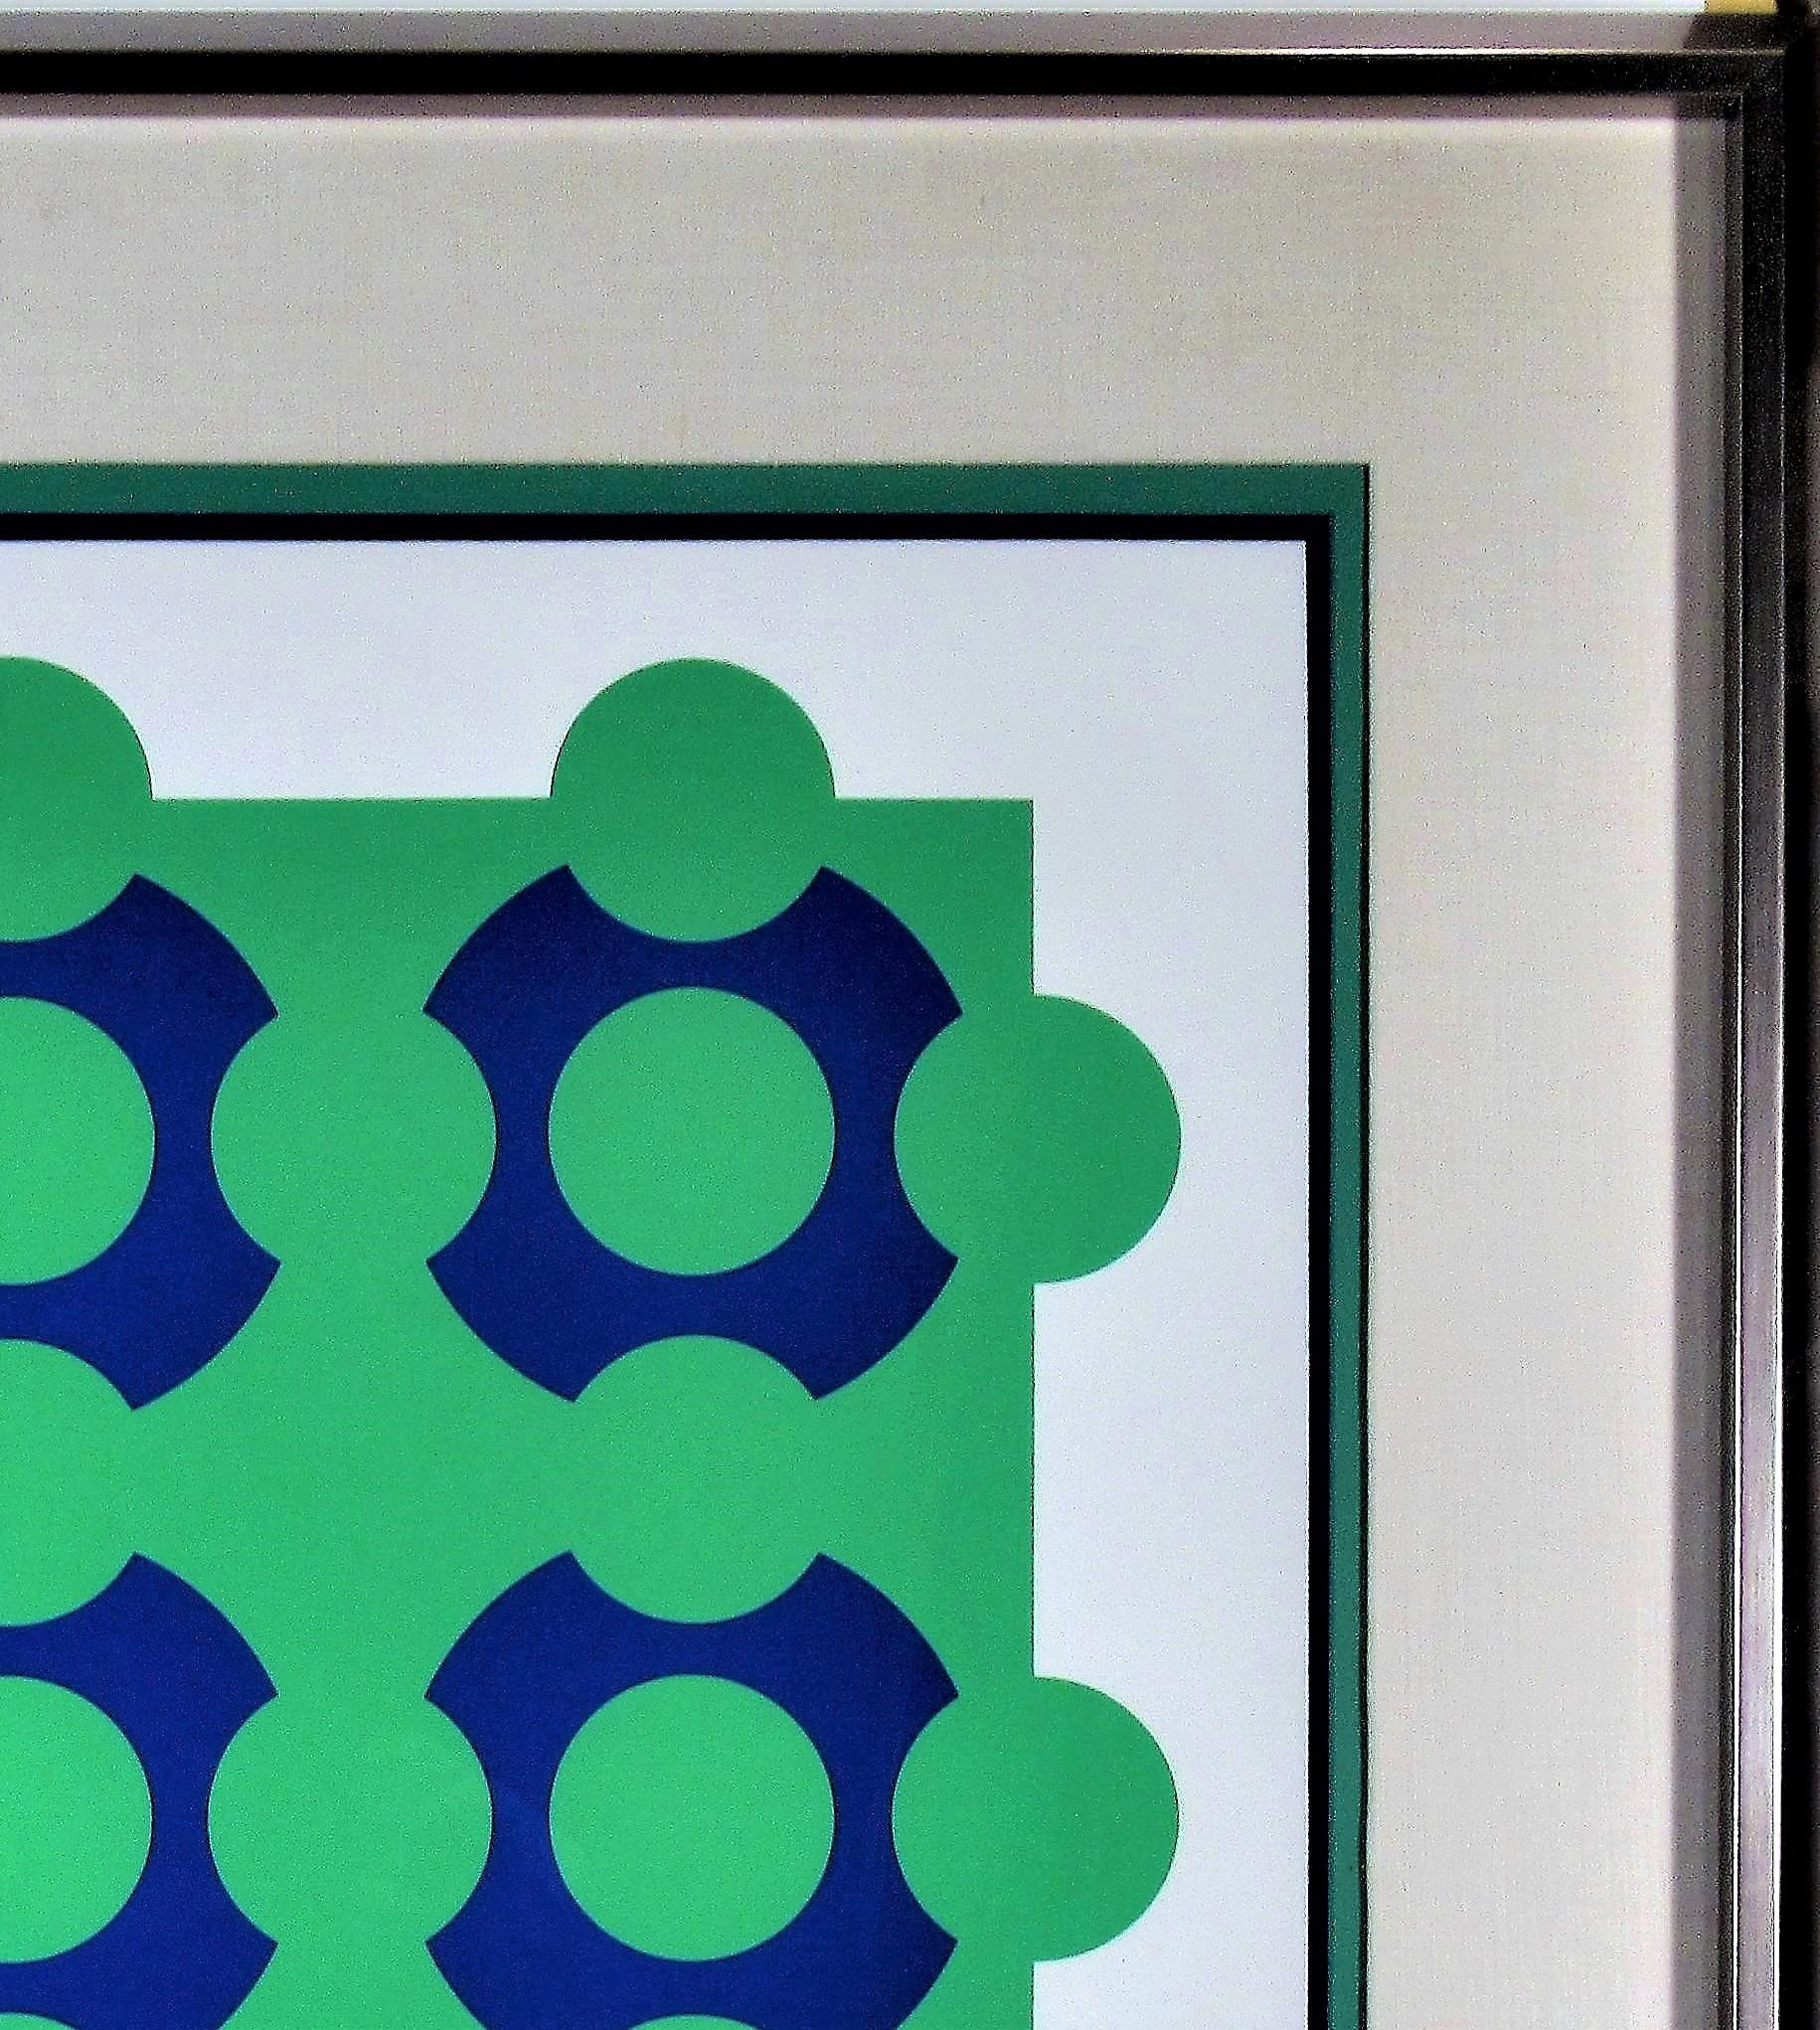 Artist:	Victor Vasarely, Hungarian, 1906-1997
Title:	Procion
Year:	1968
Medium:	Color serigraph
Edition:	Numbered 140/300 in pencil 
Paper:	Wove
Image size: 22.25 x 22.25 inches
Framed size:  36 x 35 inches
Signature:  Hand signed in pencil by the